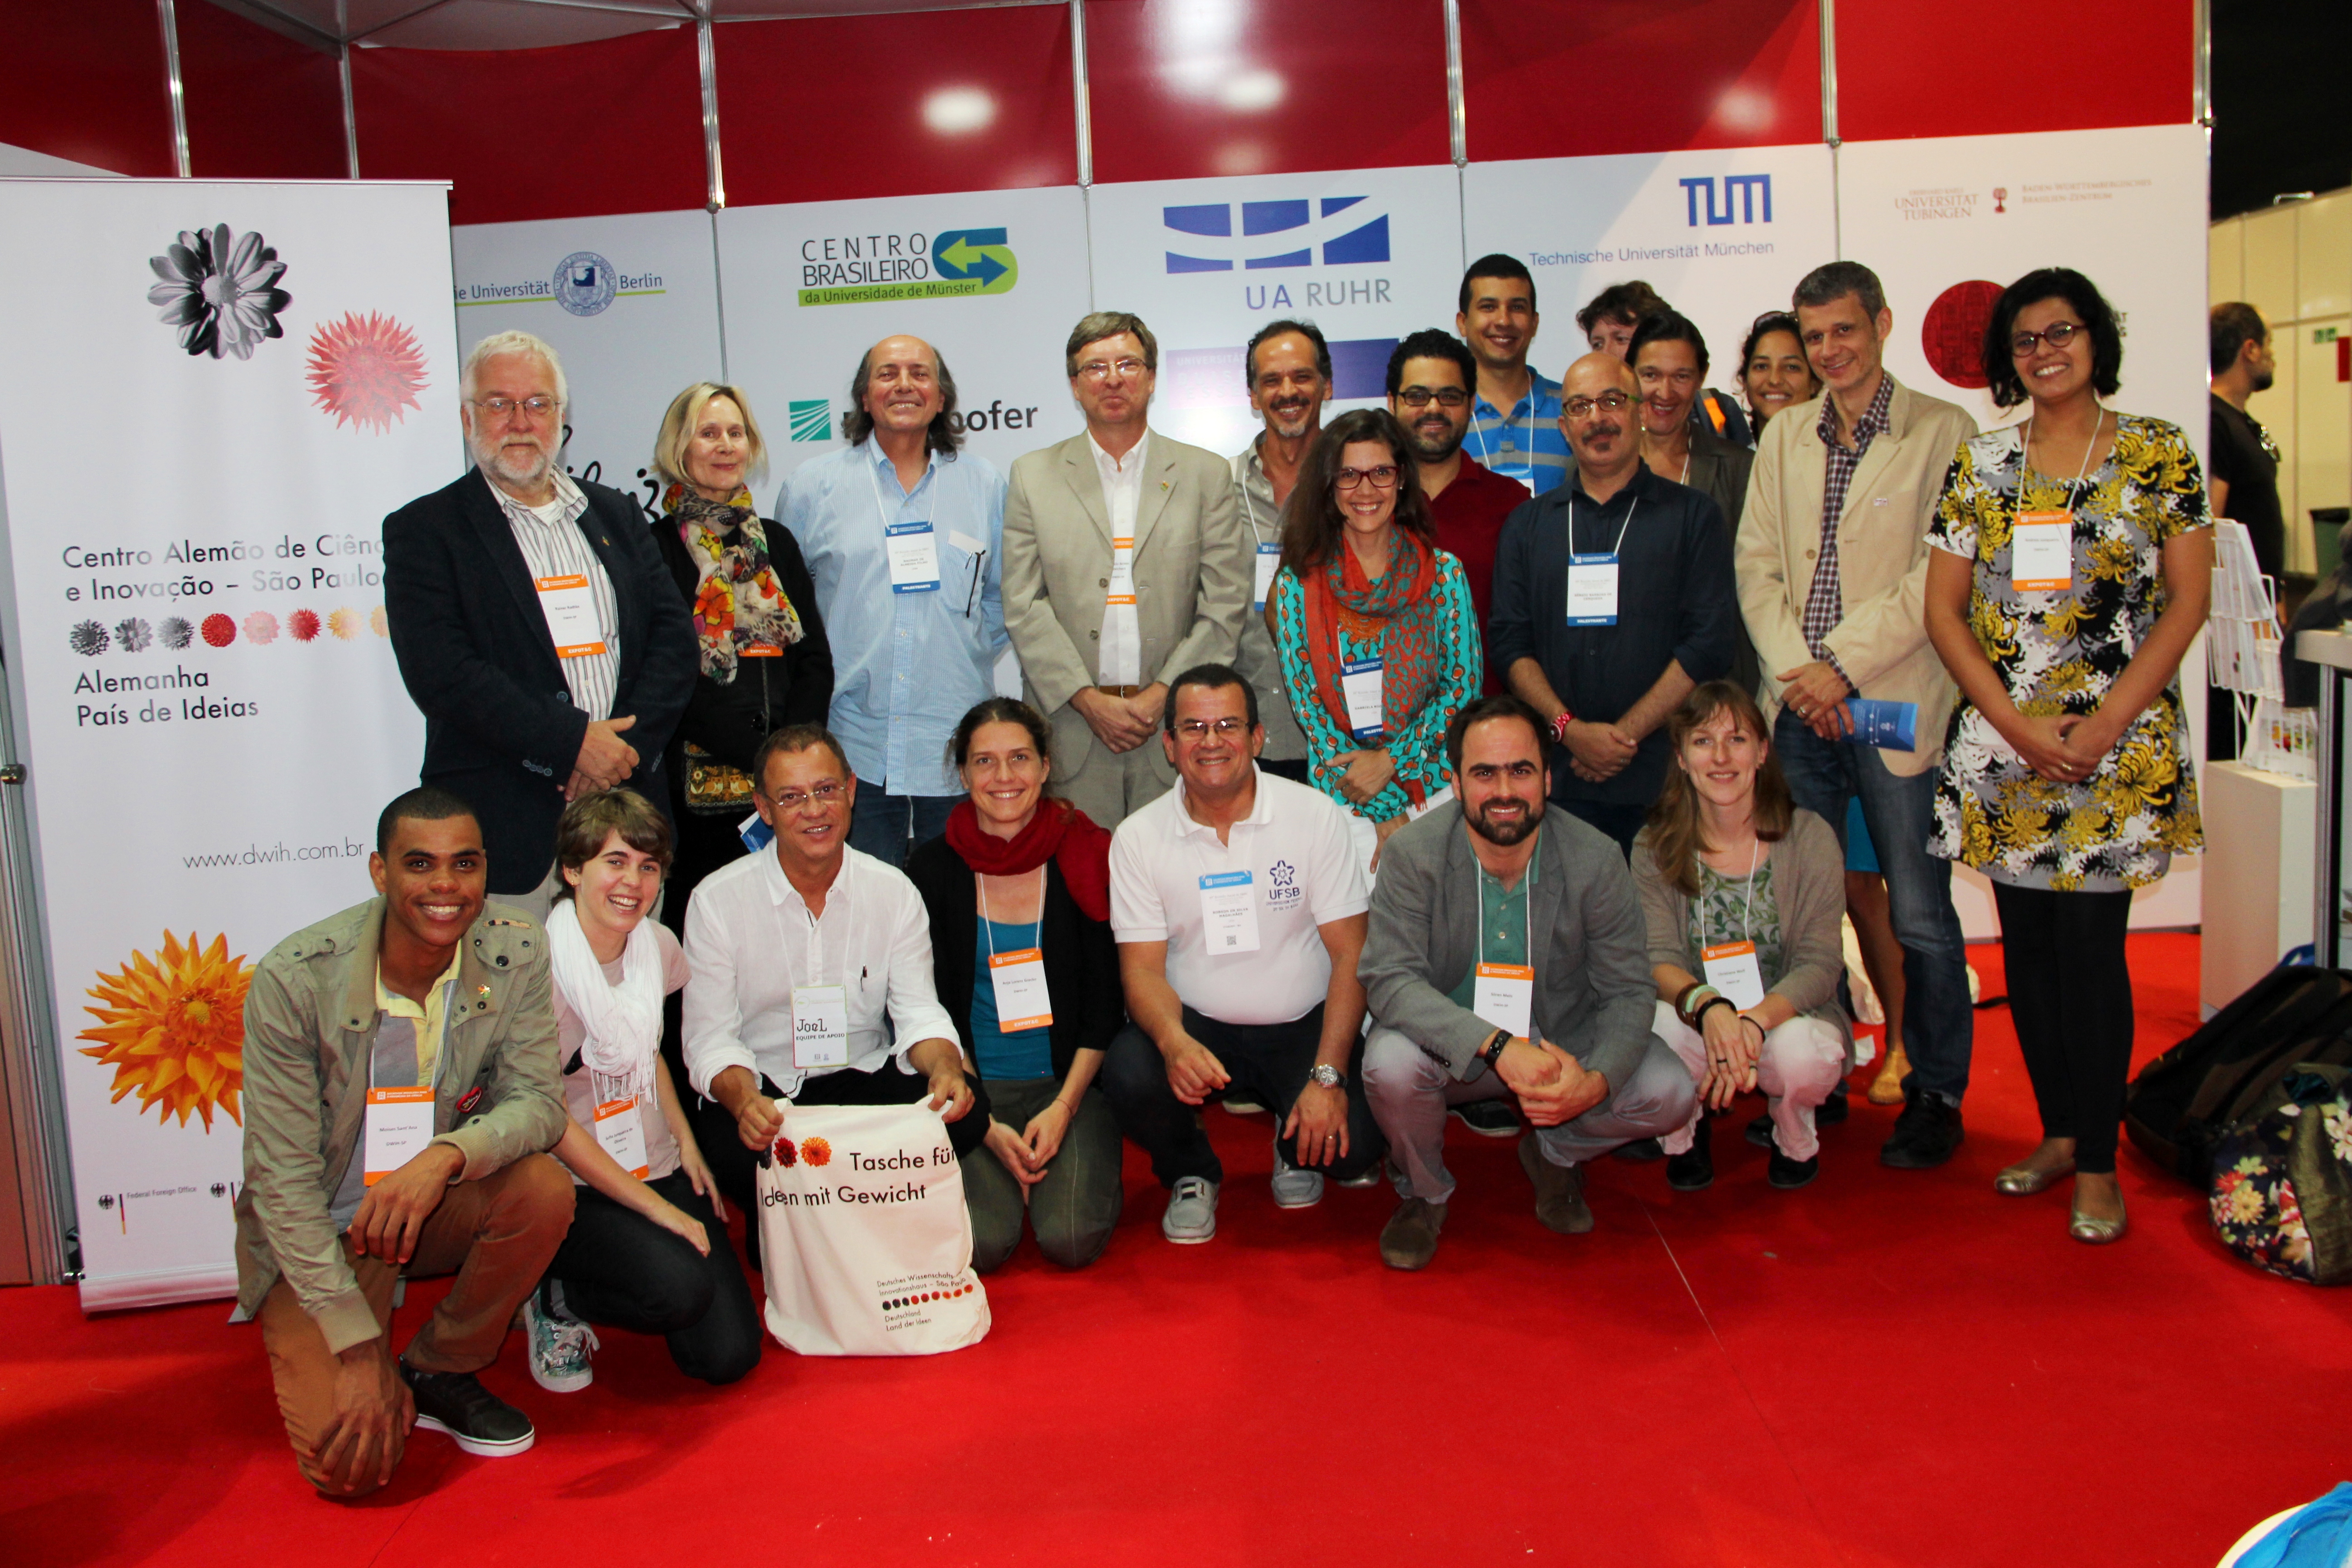 The German delegation at the 68th annual meeting of the SBPC in Porto Seguro